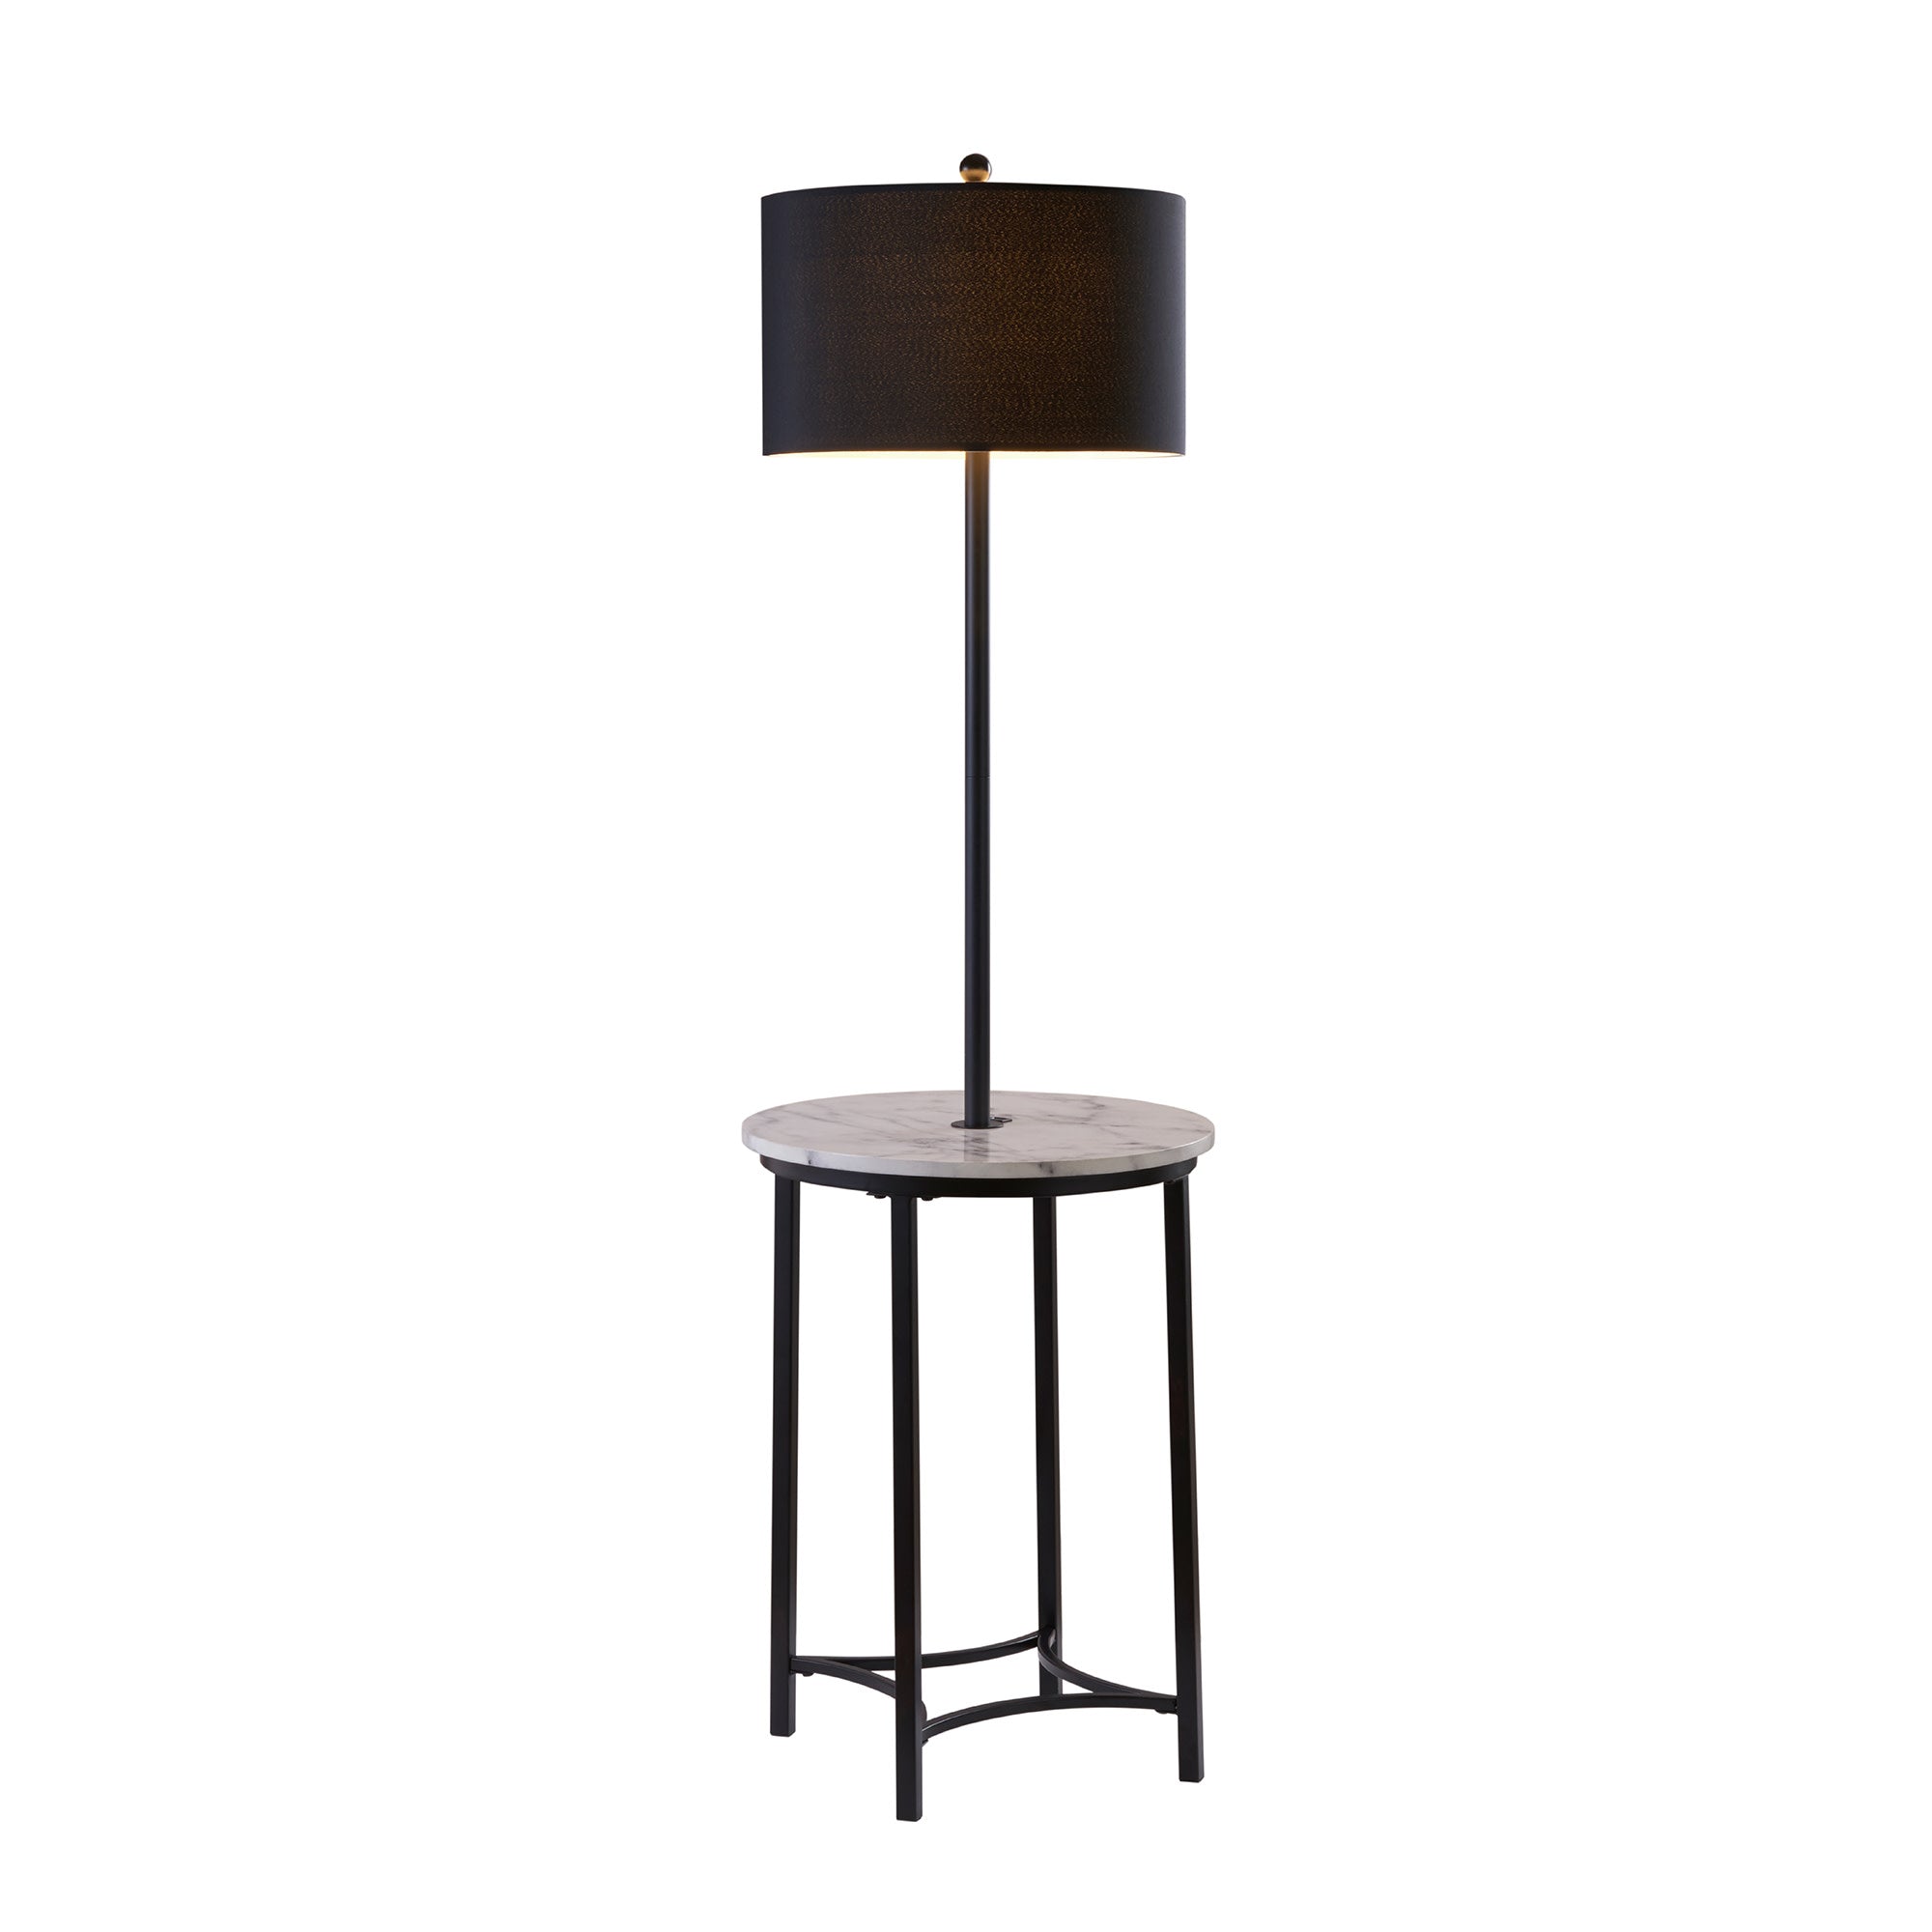 Teamson Home Shenna Floor Lamp with Faux Marble Tray Table and Built-In USB Port, Black